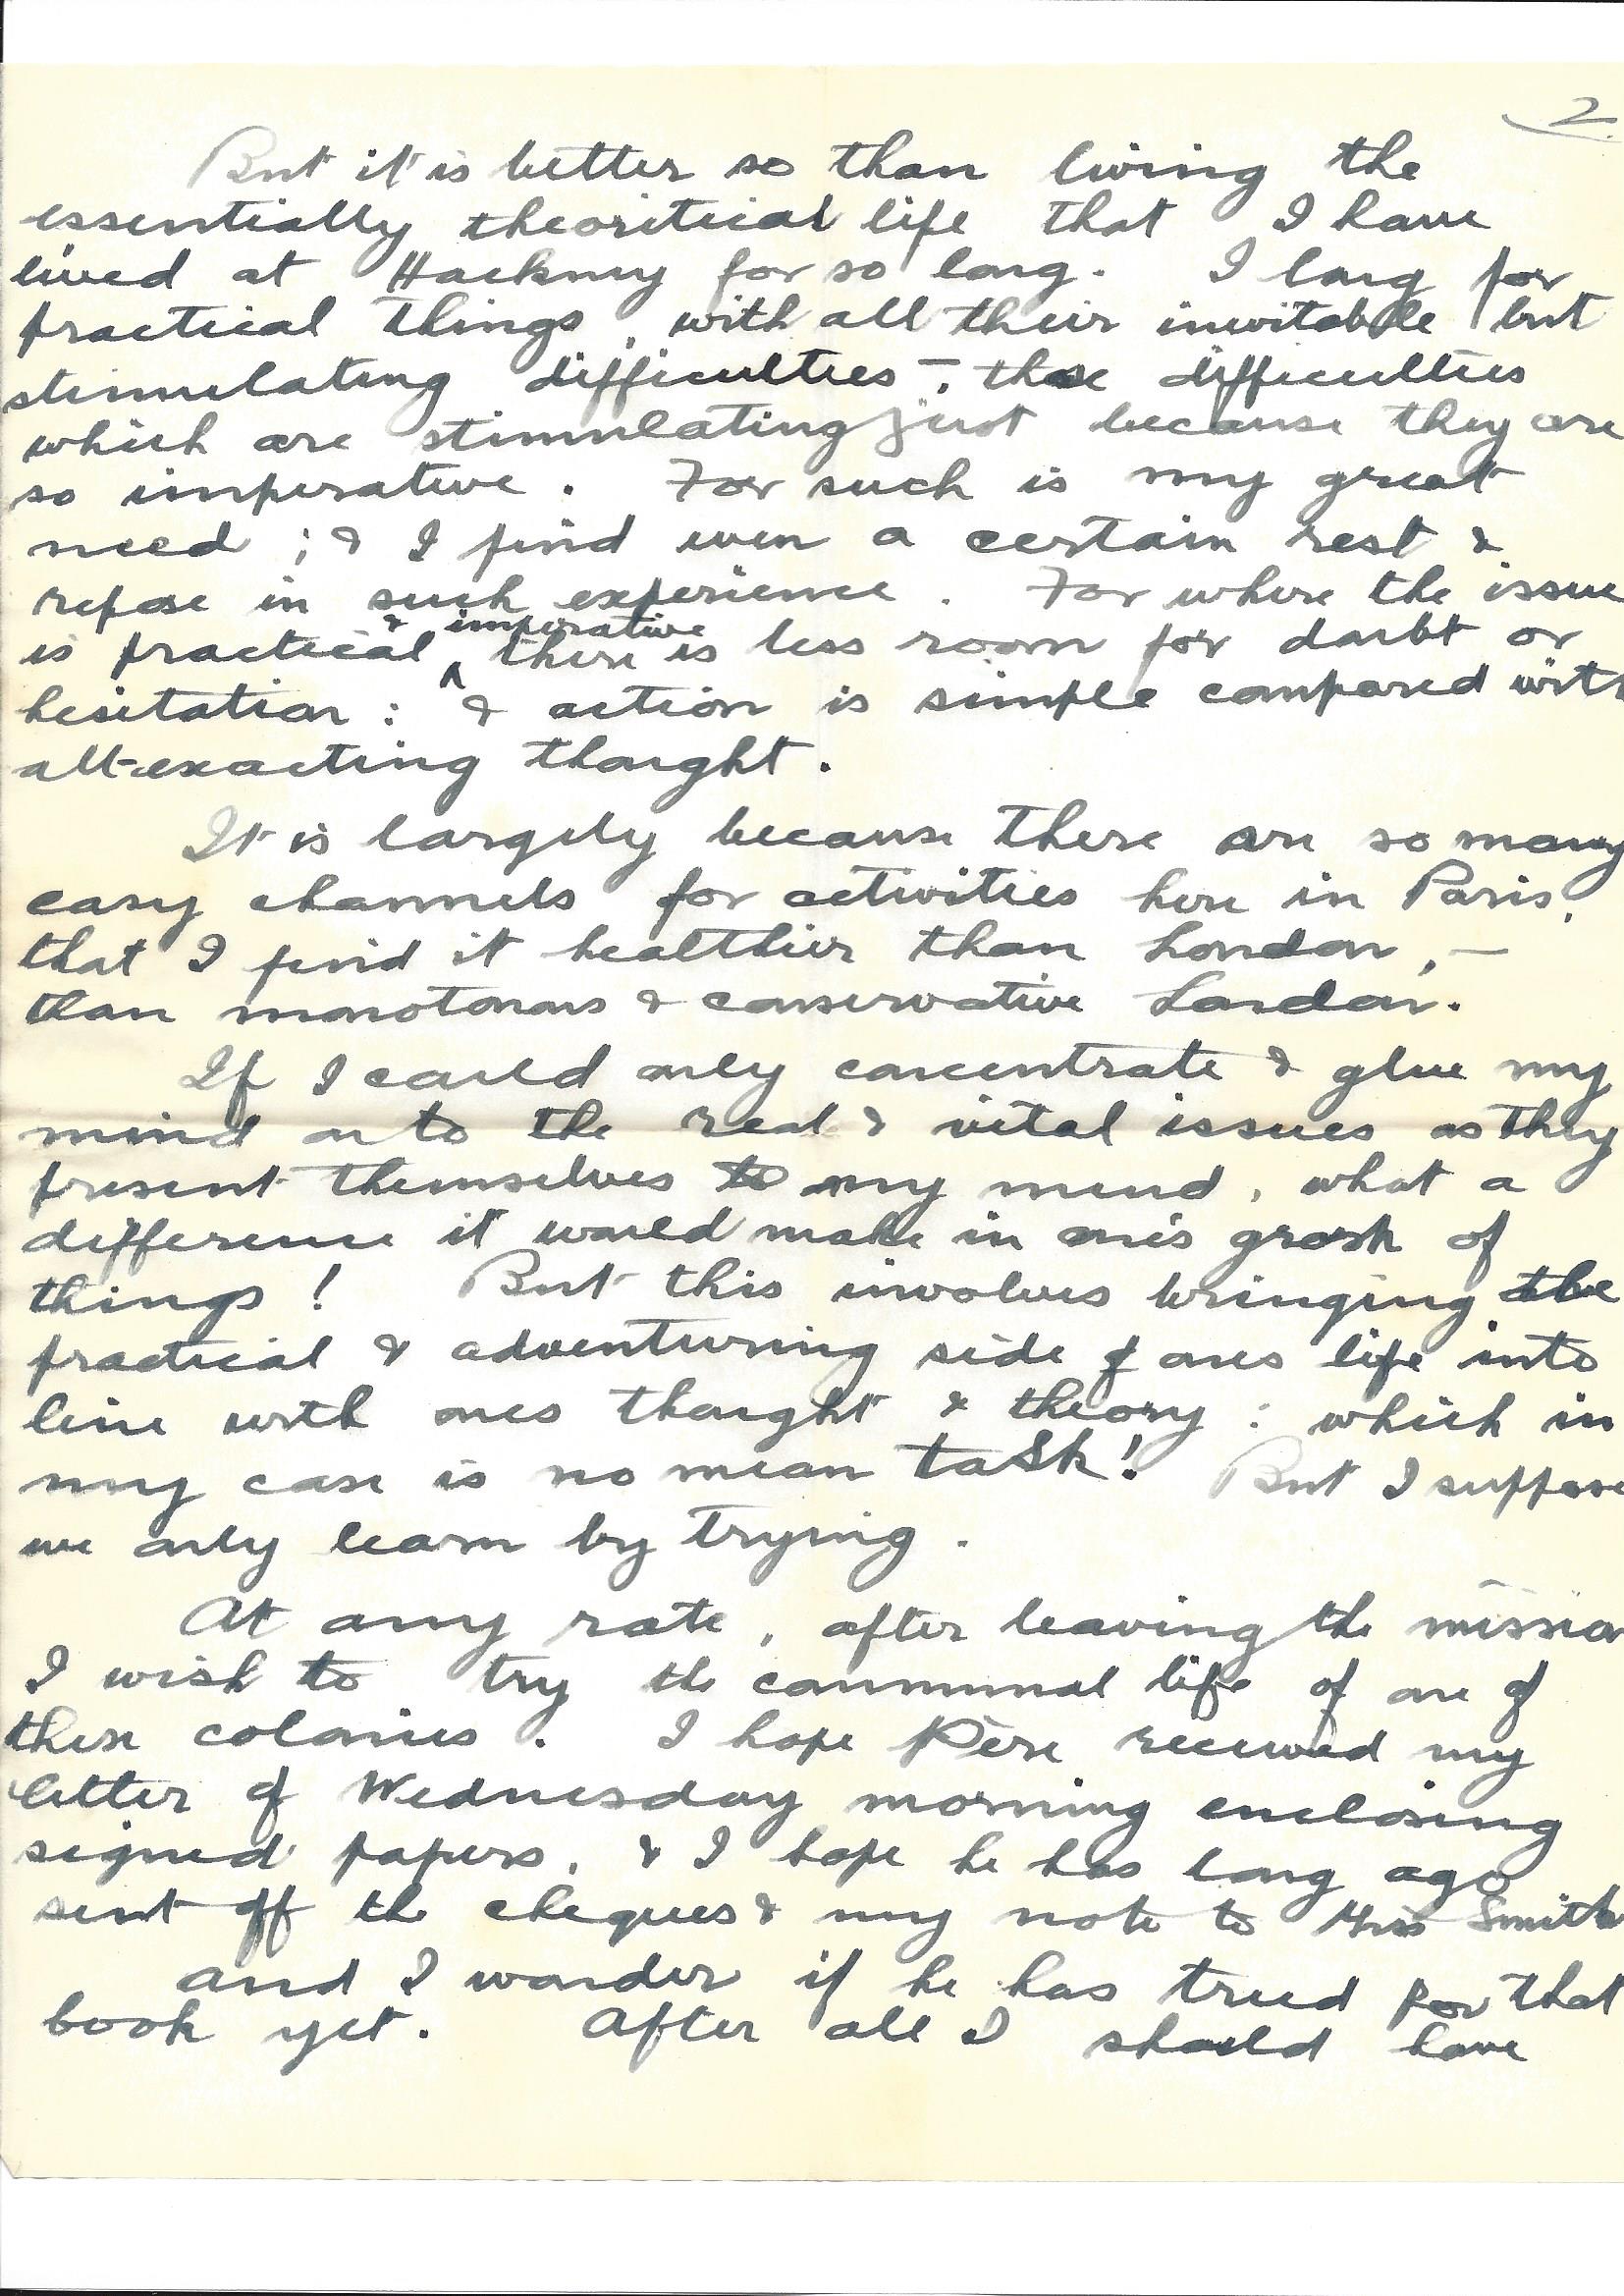 1920-01-18 page 3 letter by Donald Bearman